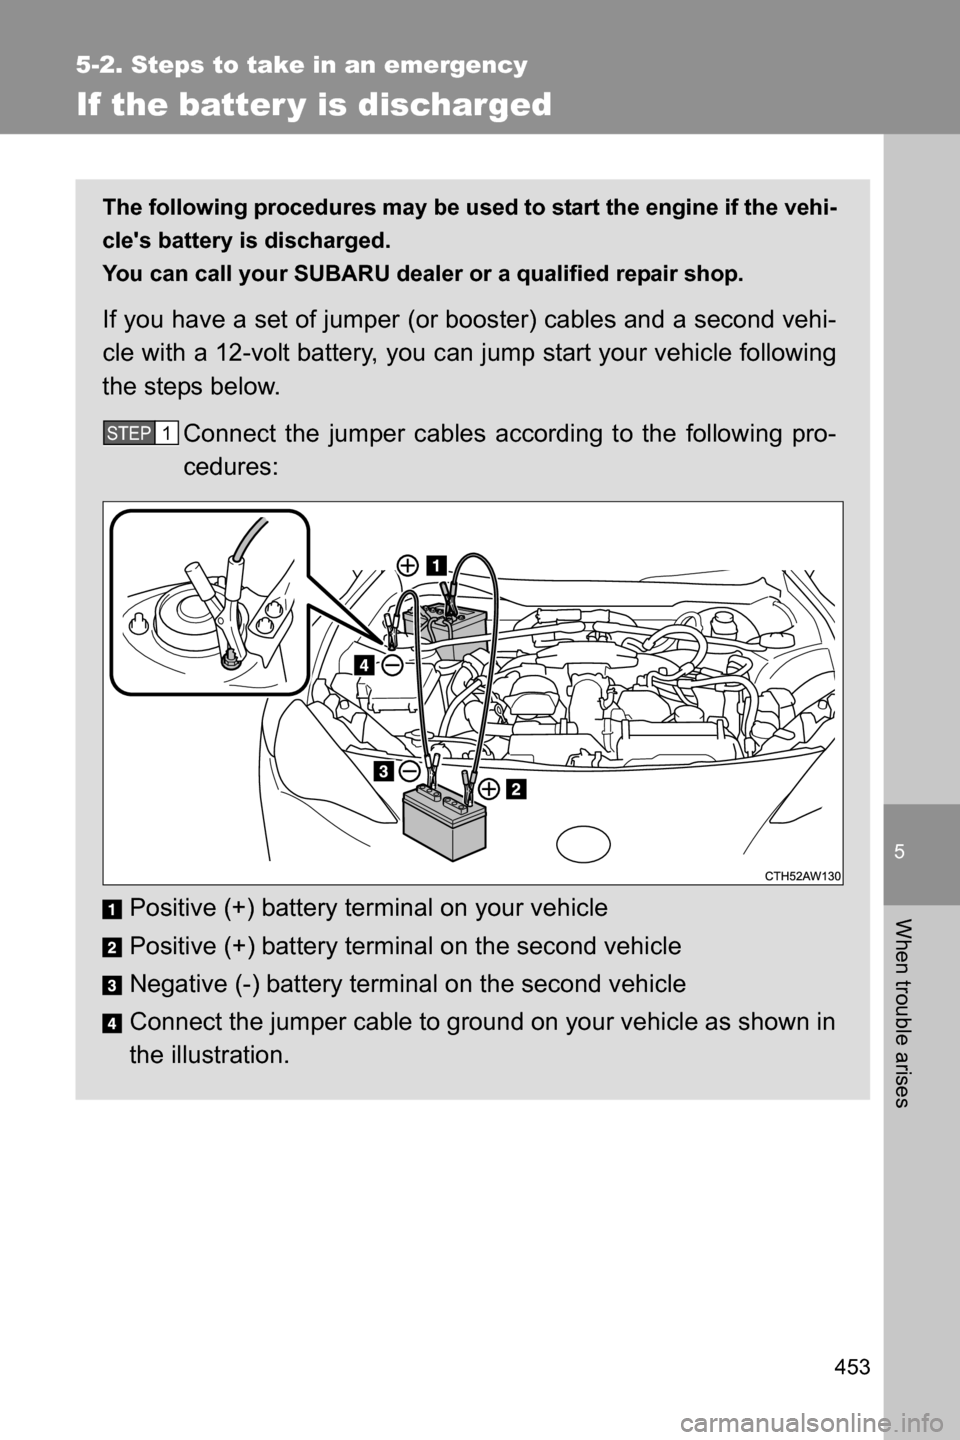 SUBARU BRZ 2017 1.G Owners Manual 5
When trouble arises
453
5-2. Steps to take in an emergency
If the batter y is discharged
The following procedures may be used to start the engine if the vehi-
cles battery is discharged. 
You can c